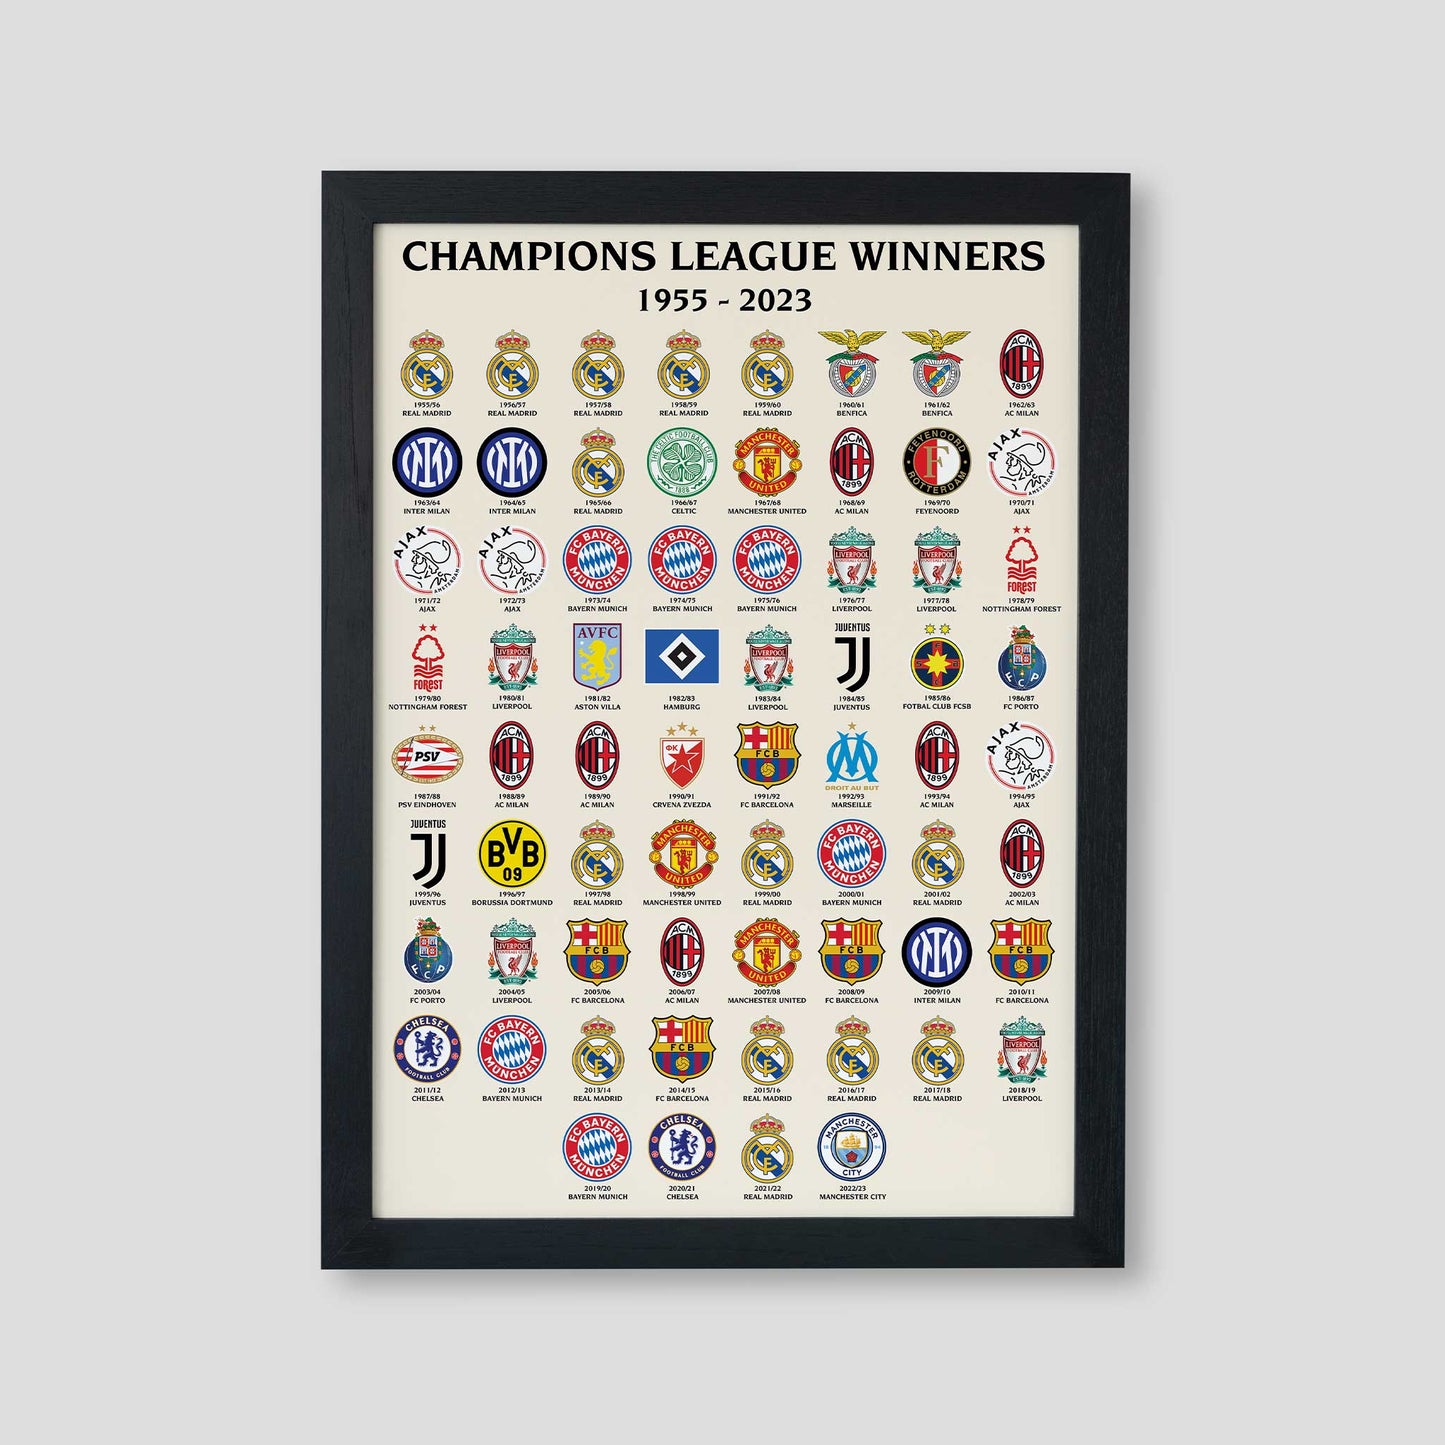 Champions of Europe Football Poster - All Champions League Winners 1955 to 2023